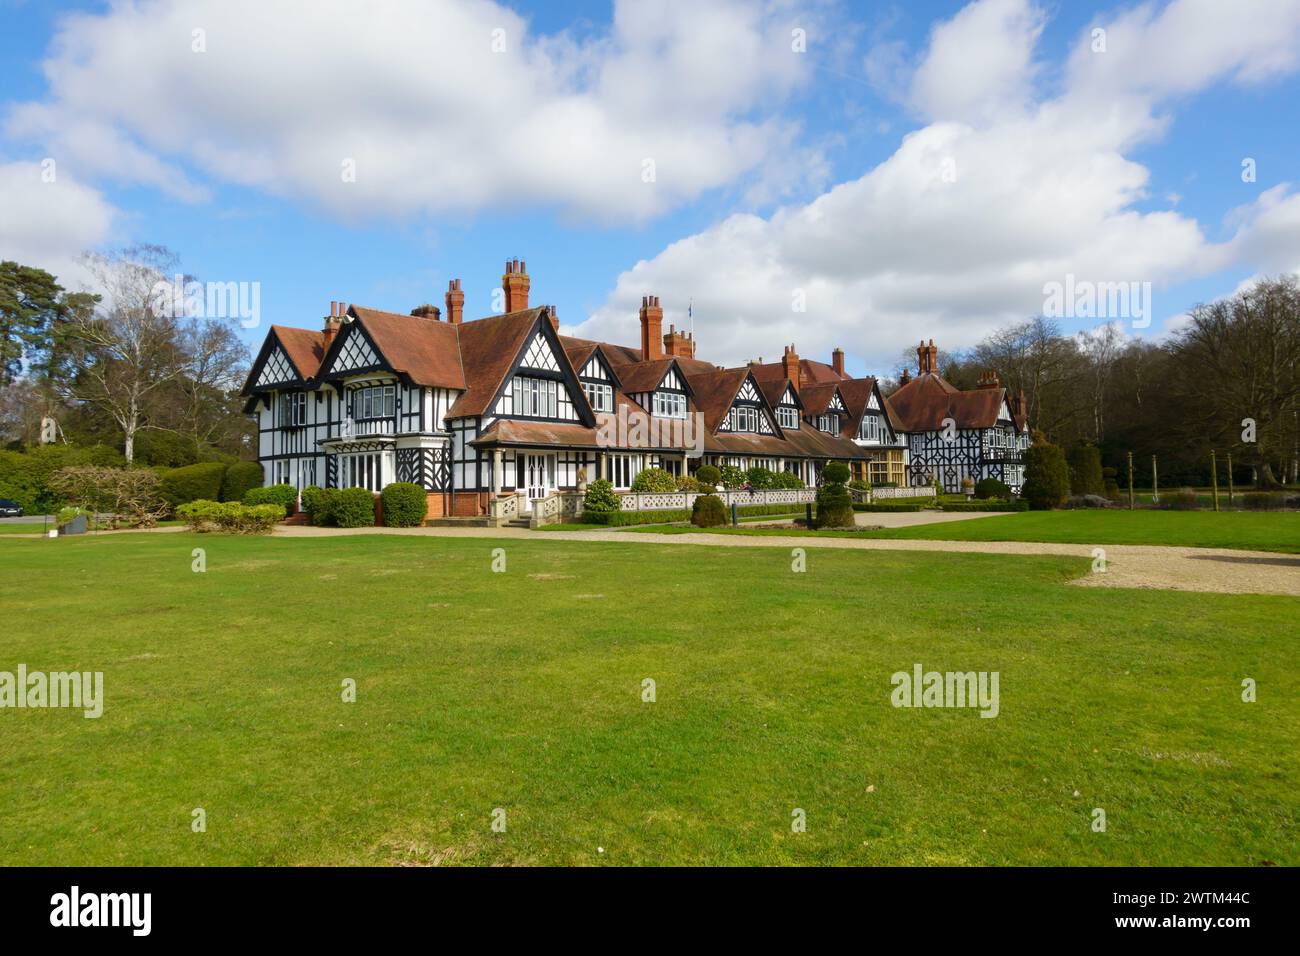 Das Petwood Hotel, ehemalige Offiziere der Royal Air Force 617 Dambusters Squadron. Woodhall Spa, Lincolnshire, England Stockfoto